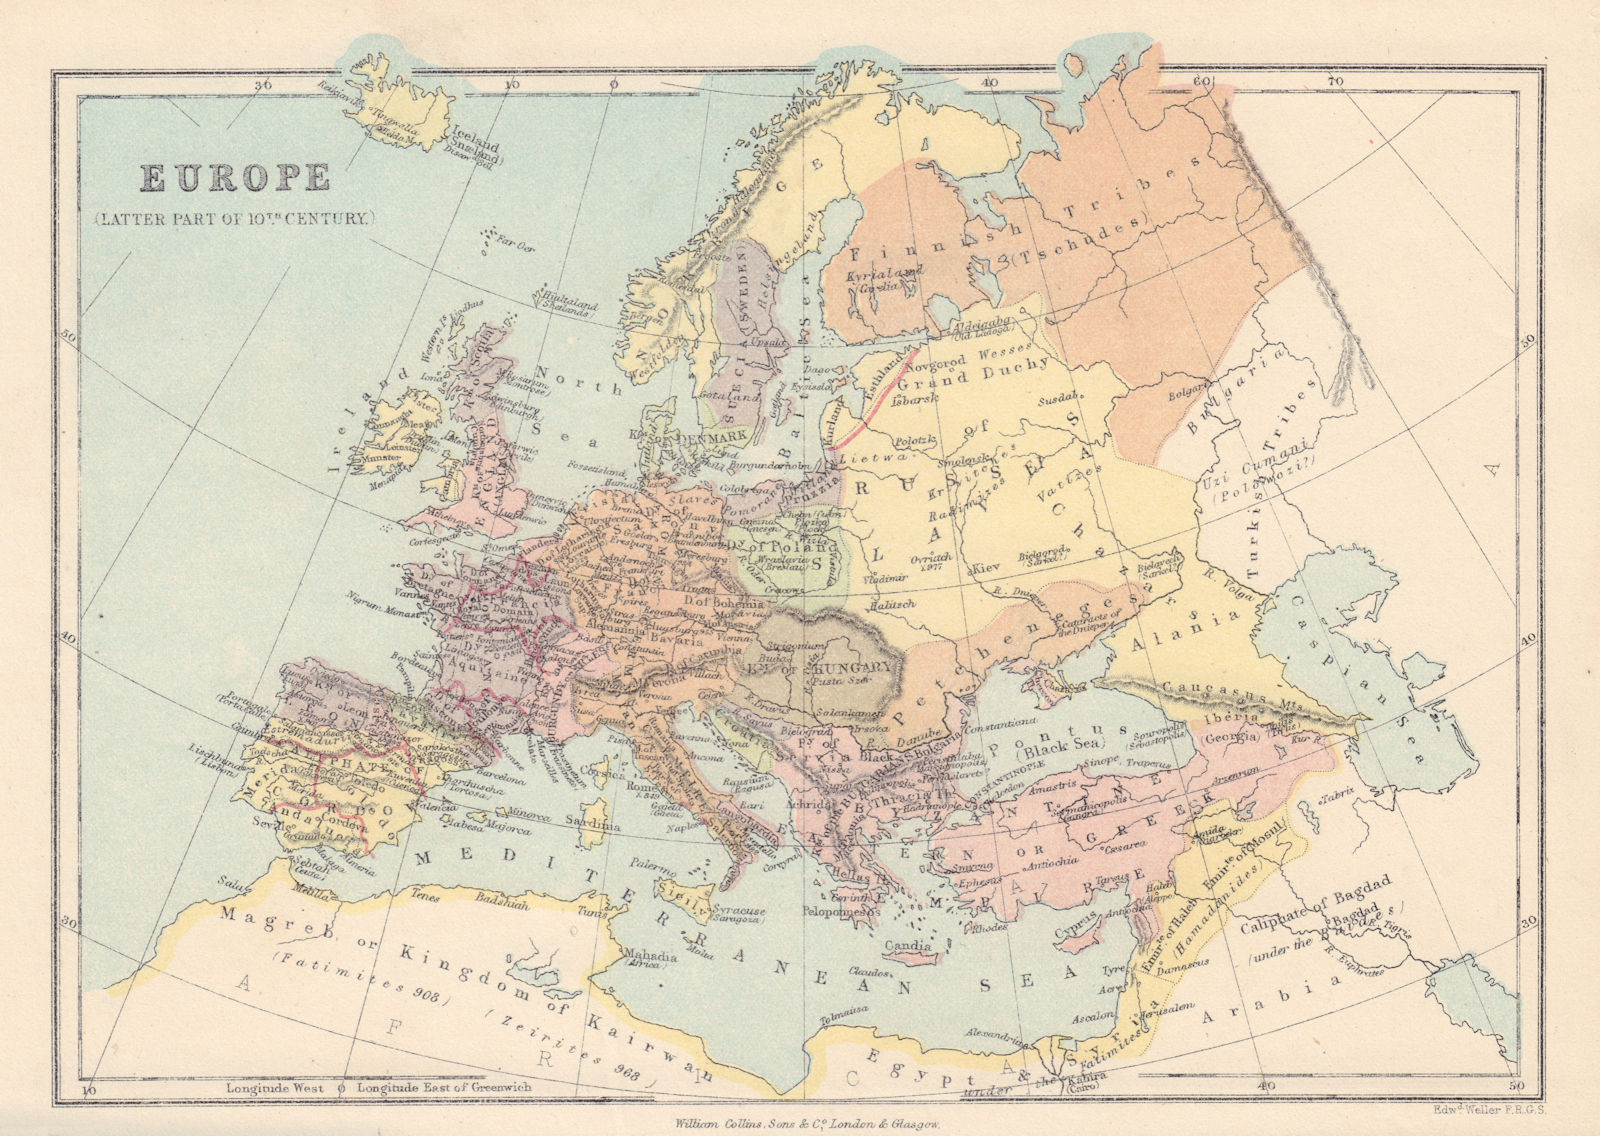 10TH CENTURY EUROPE. Holy Roman Empire Caliphate of Cordoba. COLLINS 1873 map